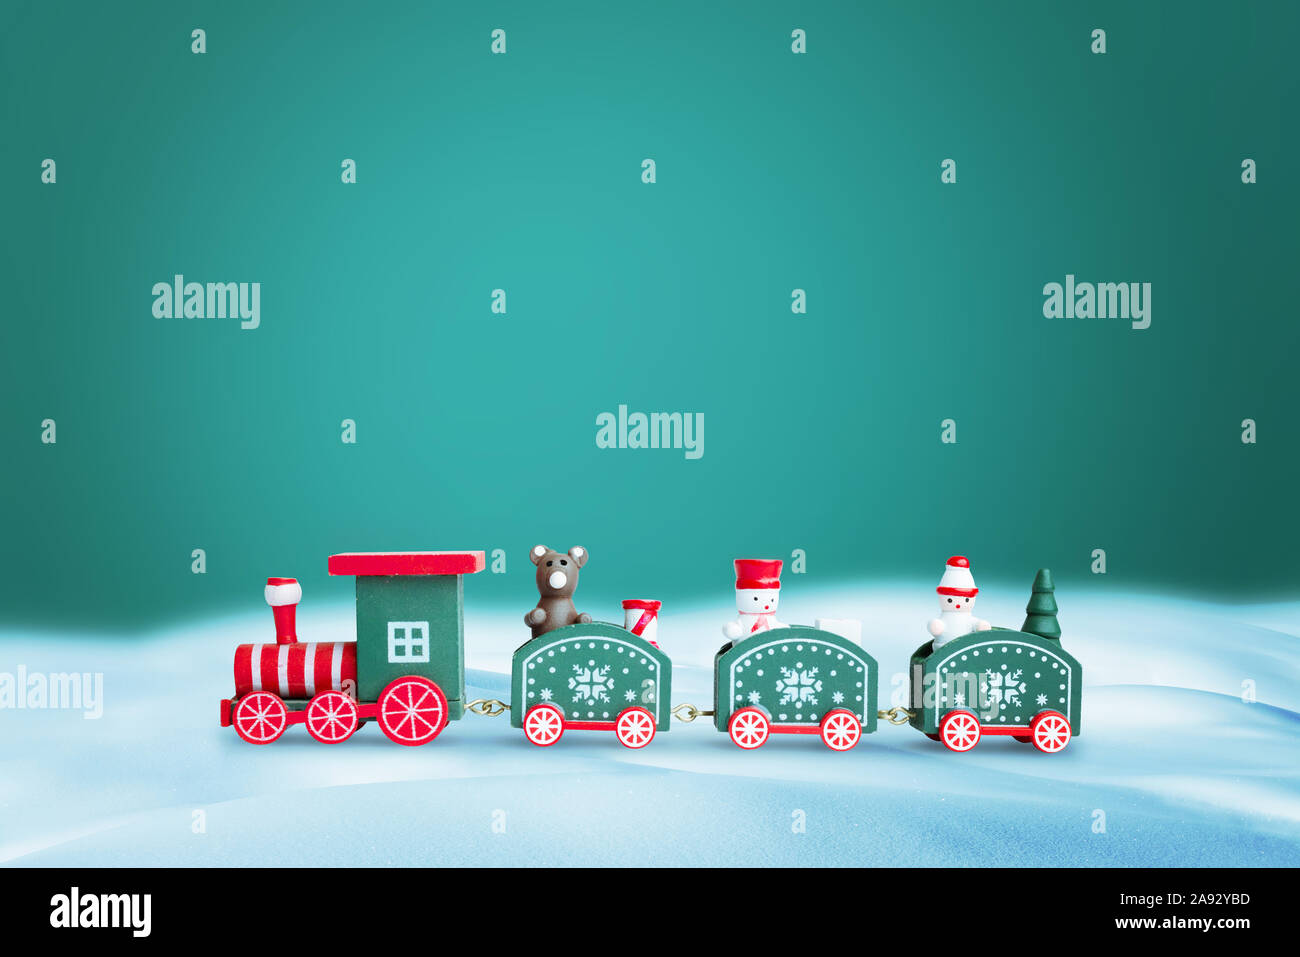 Green train in snow. Copy space above on green background for greeting text. Christmas, New Year greeting card concept. Stock Photo